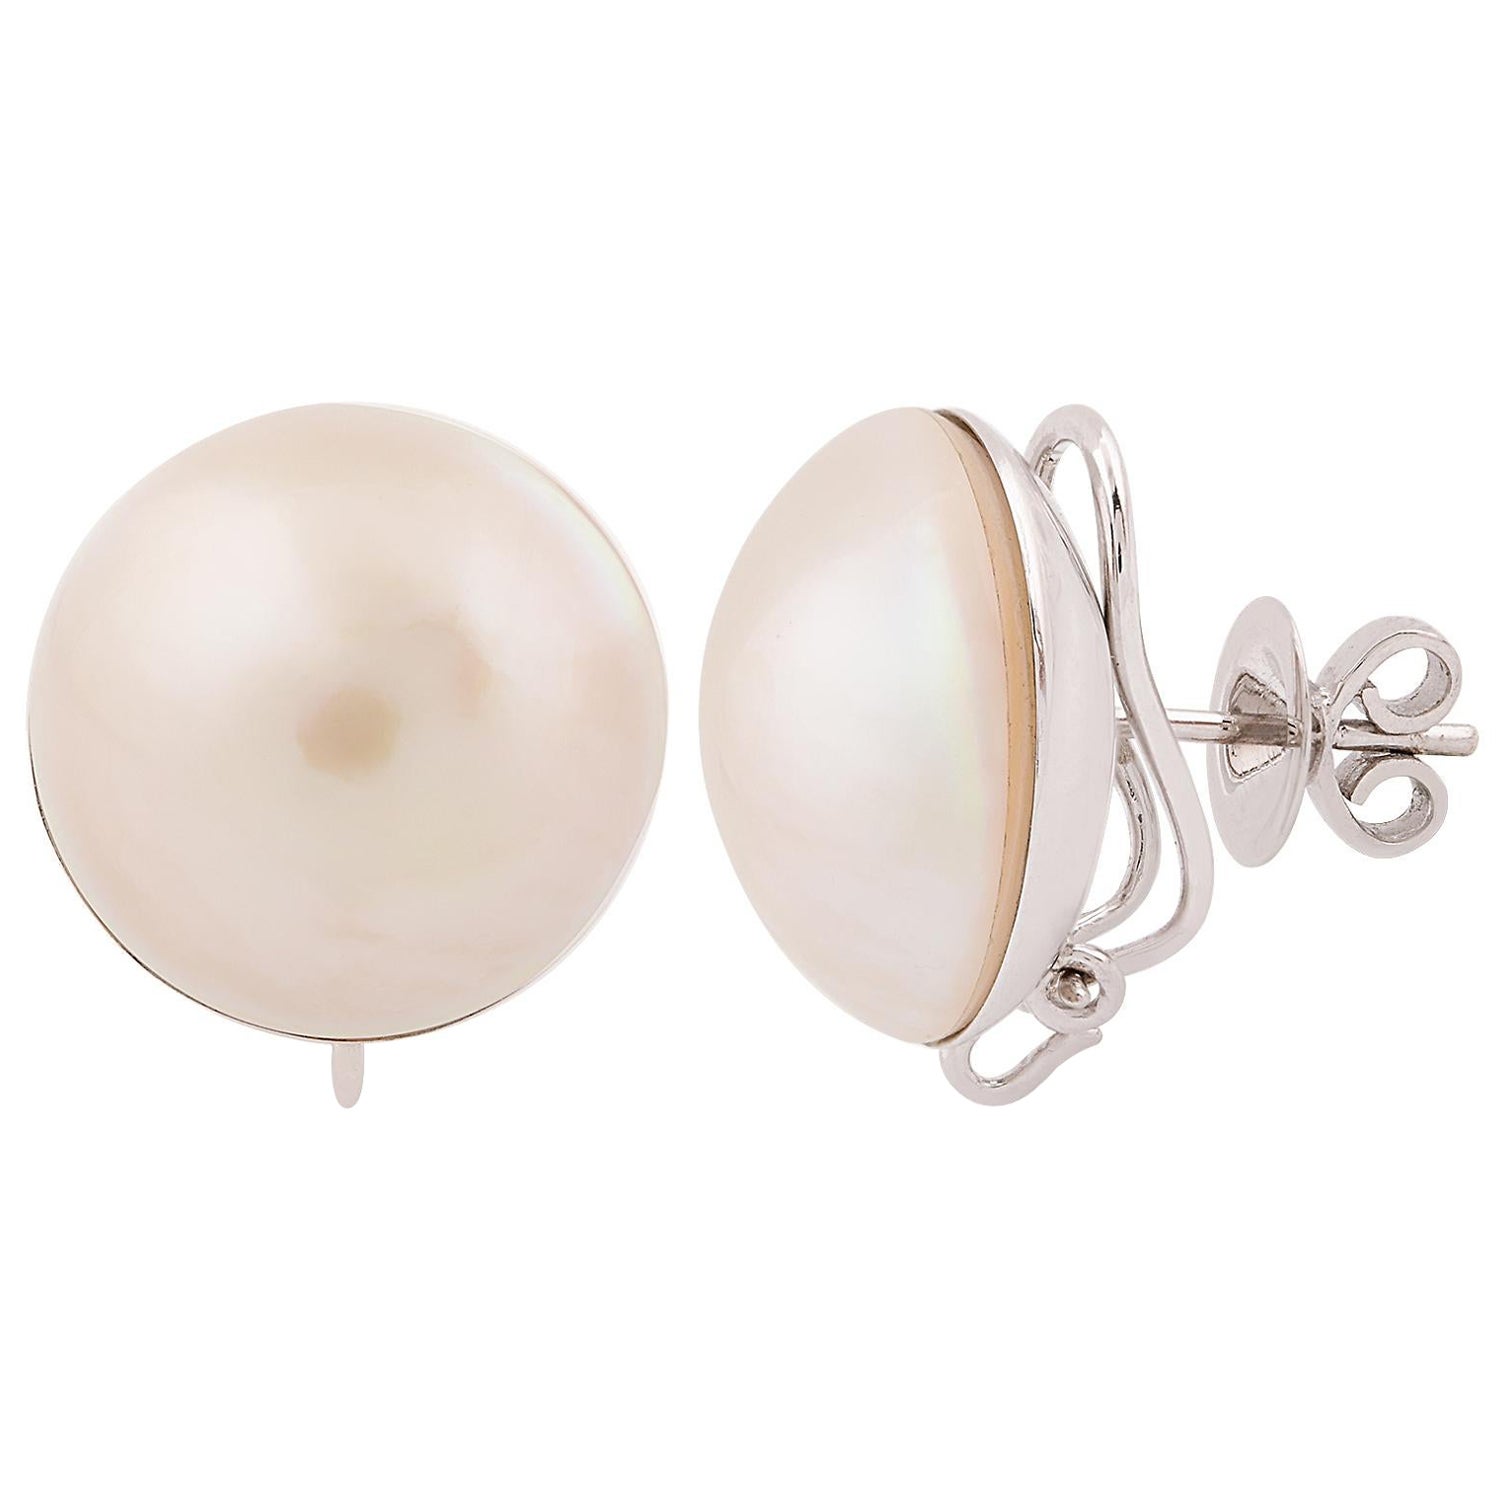 Natural 23.86 Carat Pearl Gemstone Stud Earrings Solid 14k White Gold Jewelry For Sale